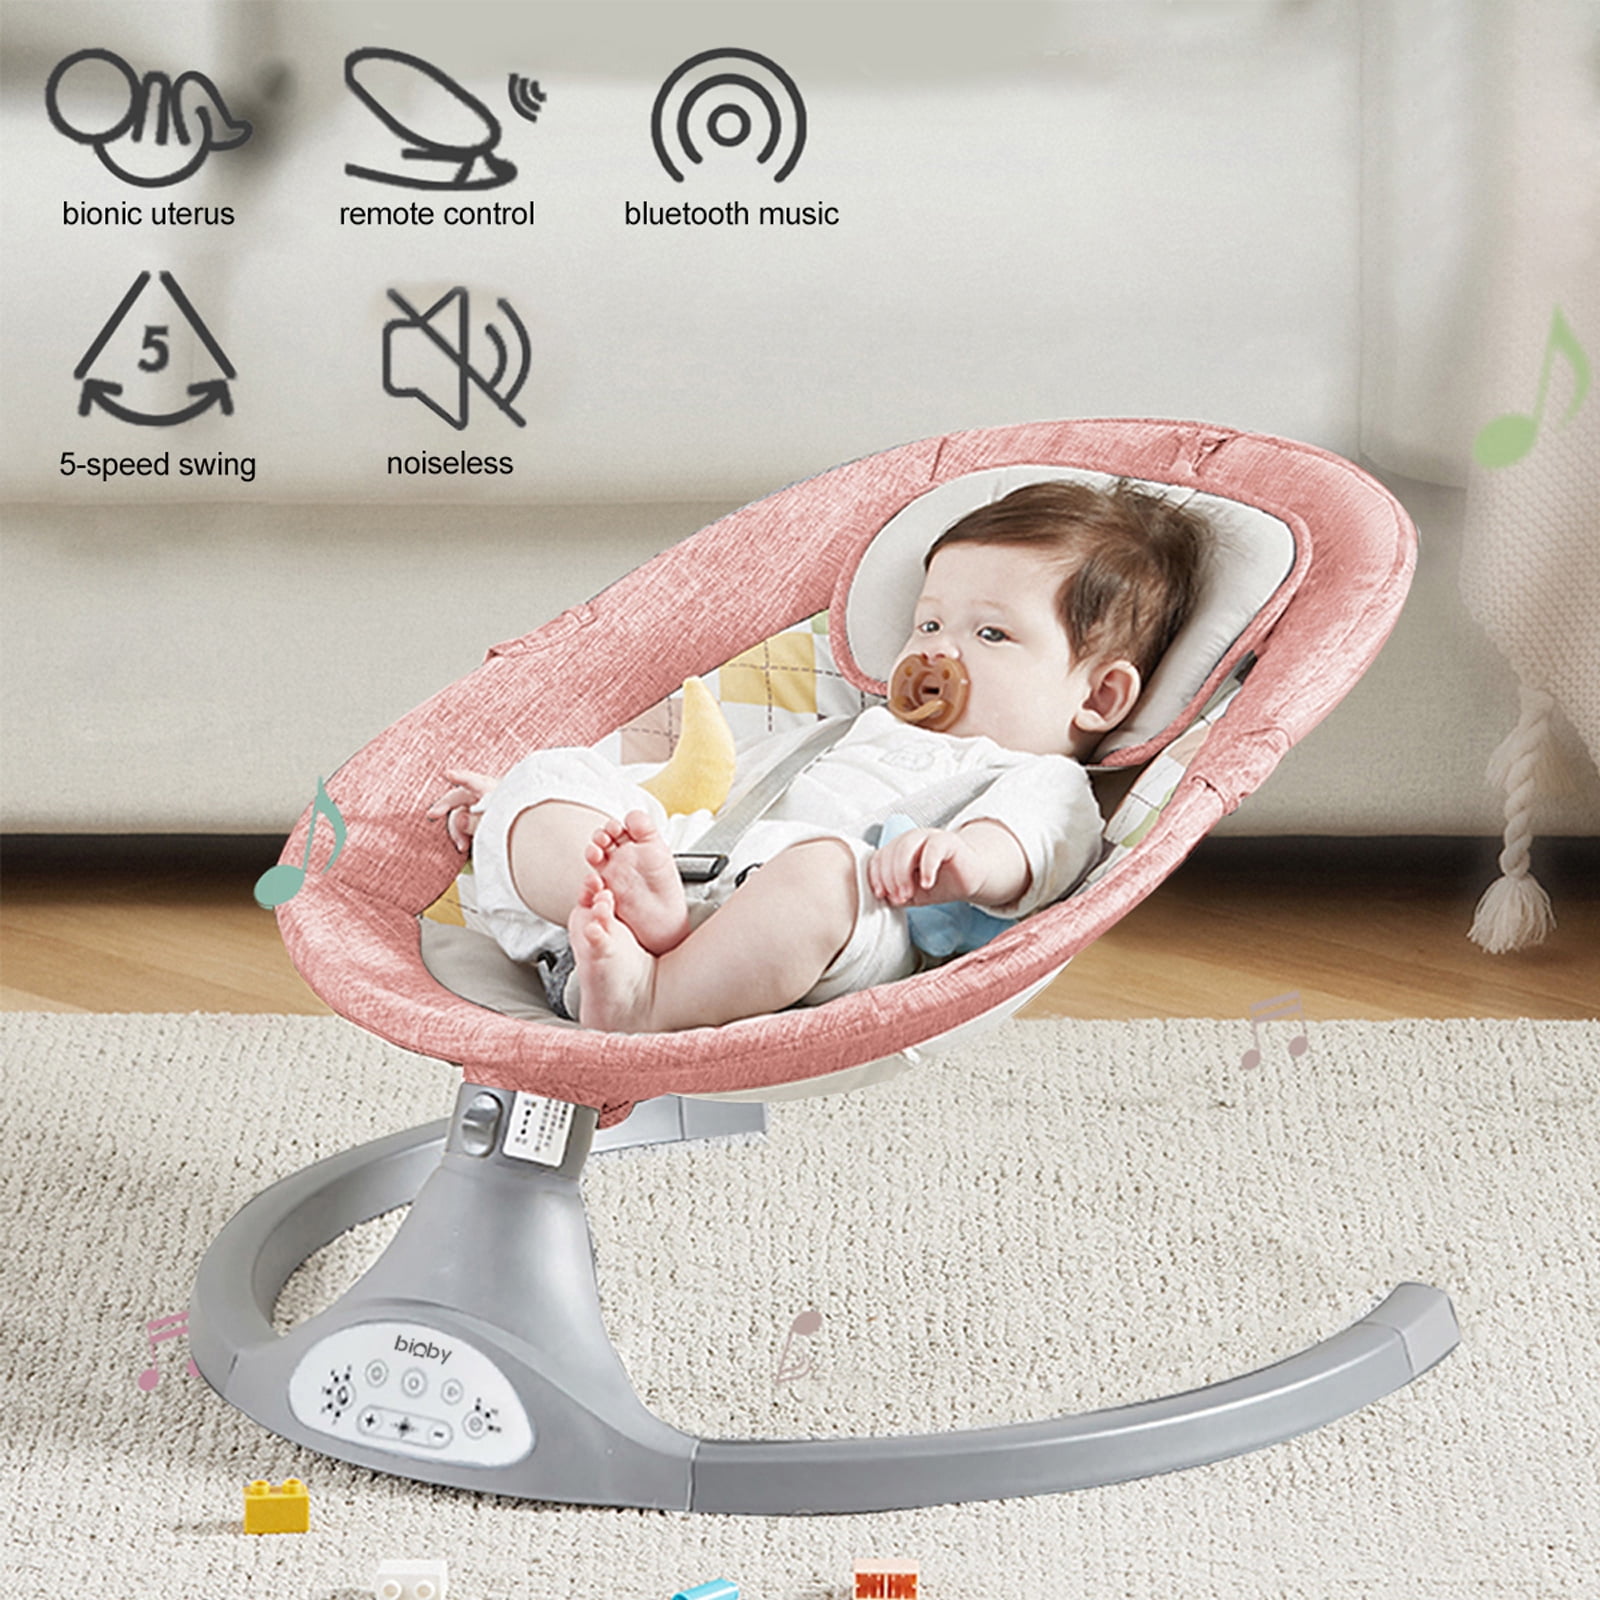 Portable Baby Swing Cradle for Infants Rocker Chair with Music Comfort and Soothing Baby Swing Can Be Used from The Beginning of The Newborn 